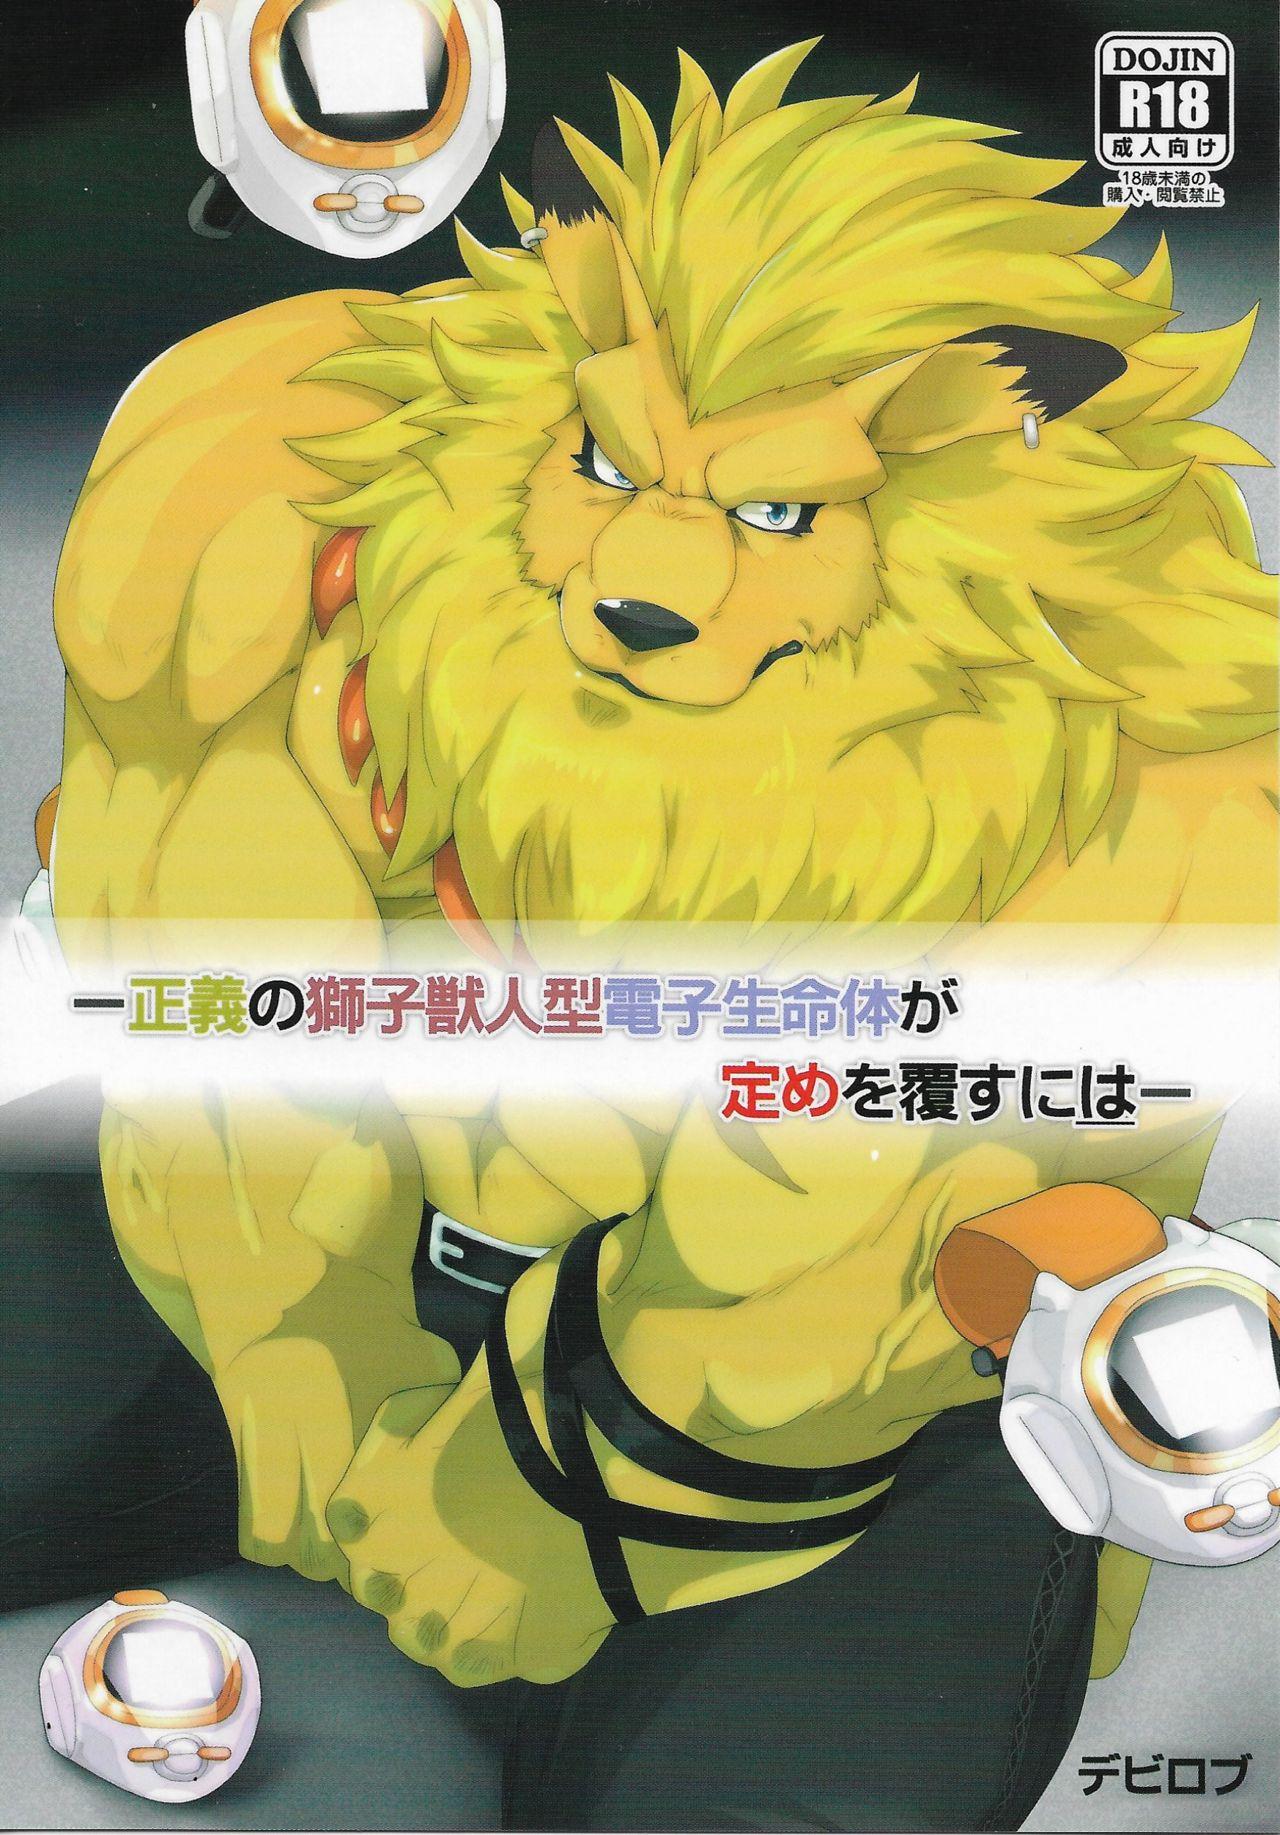 [Debirobu] For the Lion-Man Type Electric Life Form to Overturn Fate - Leomon Doujin [ENG] 0